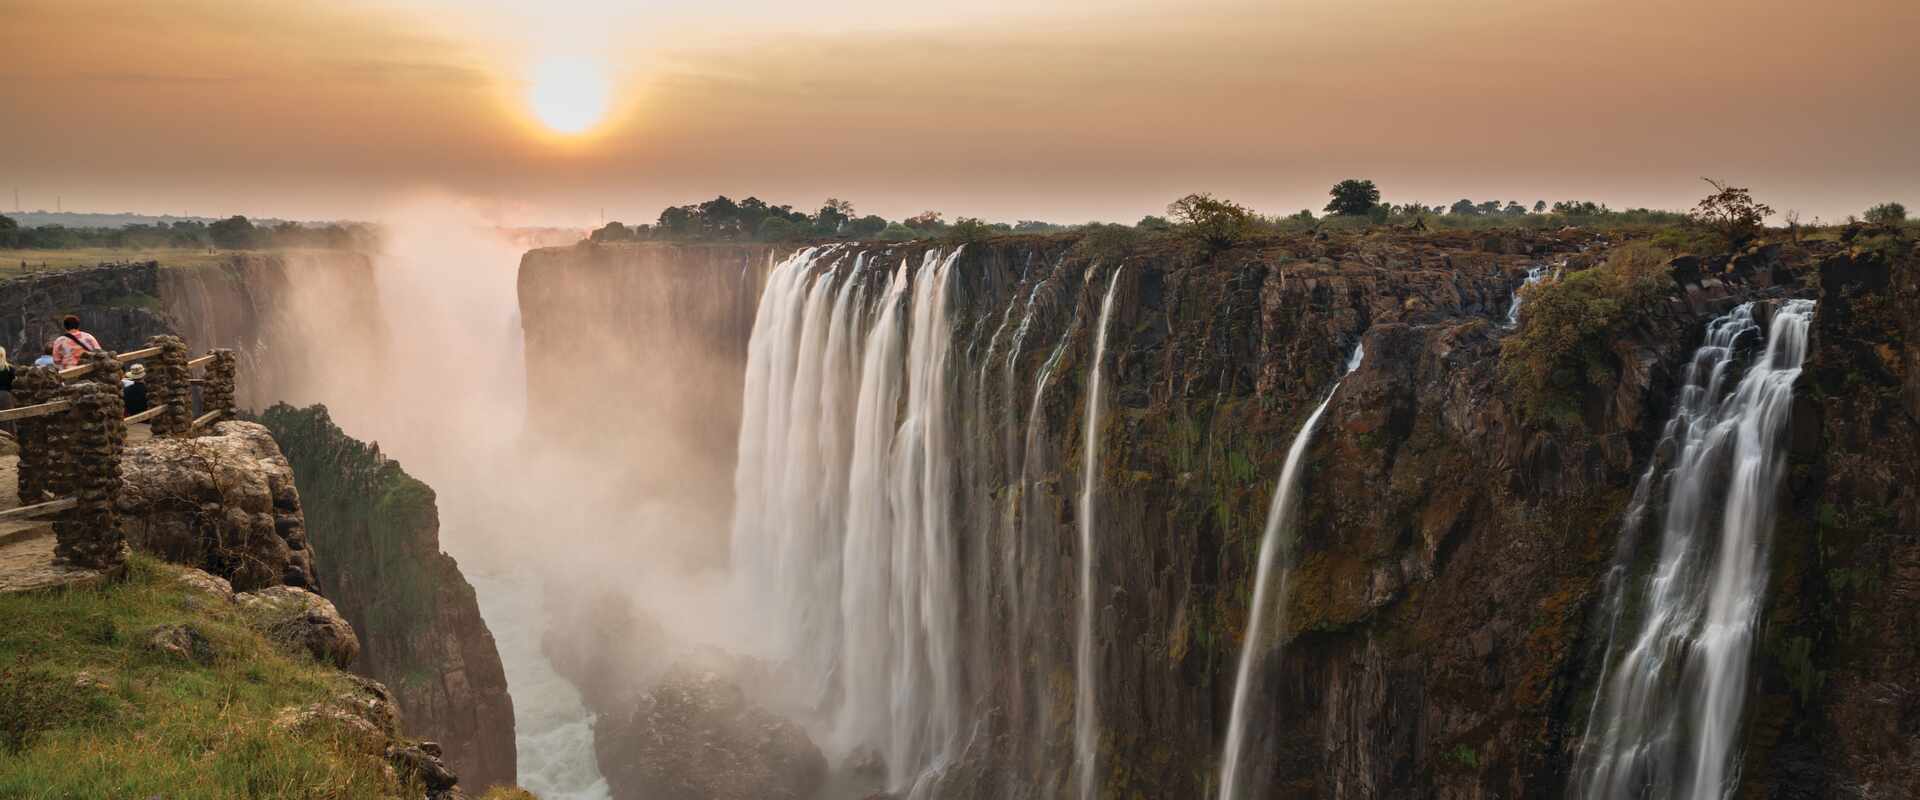 View of roaring Victoria Falls from the observation deck, Zimbabwe